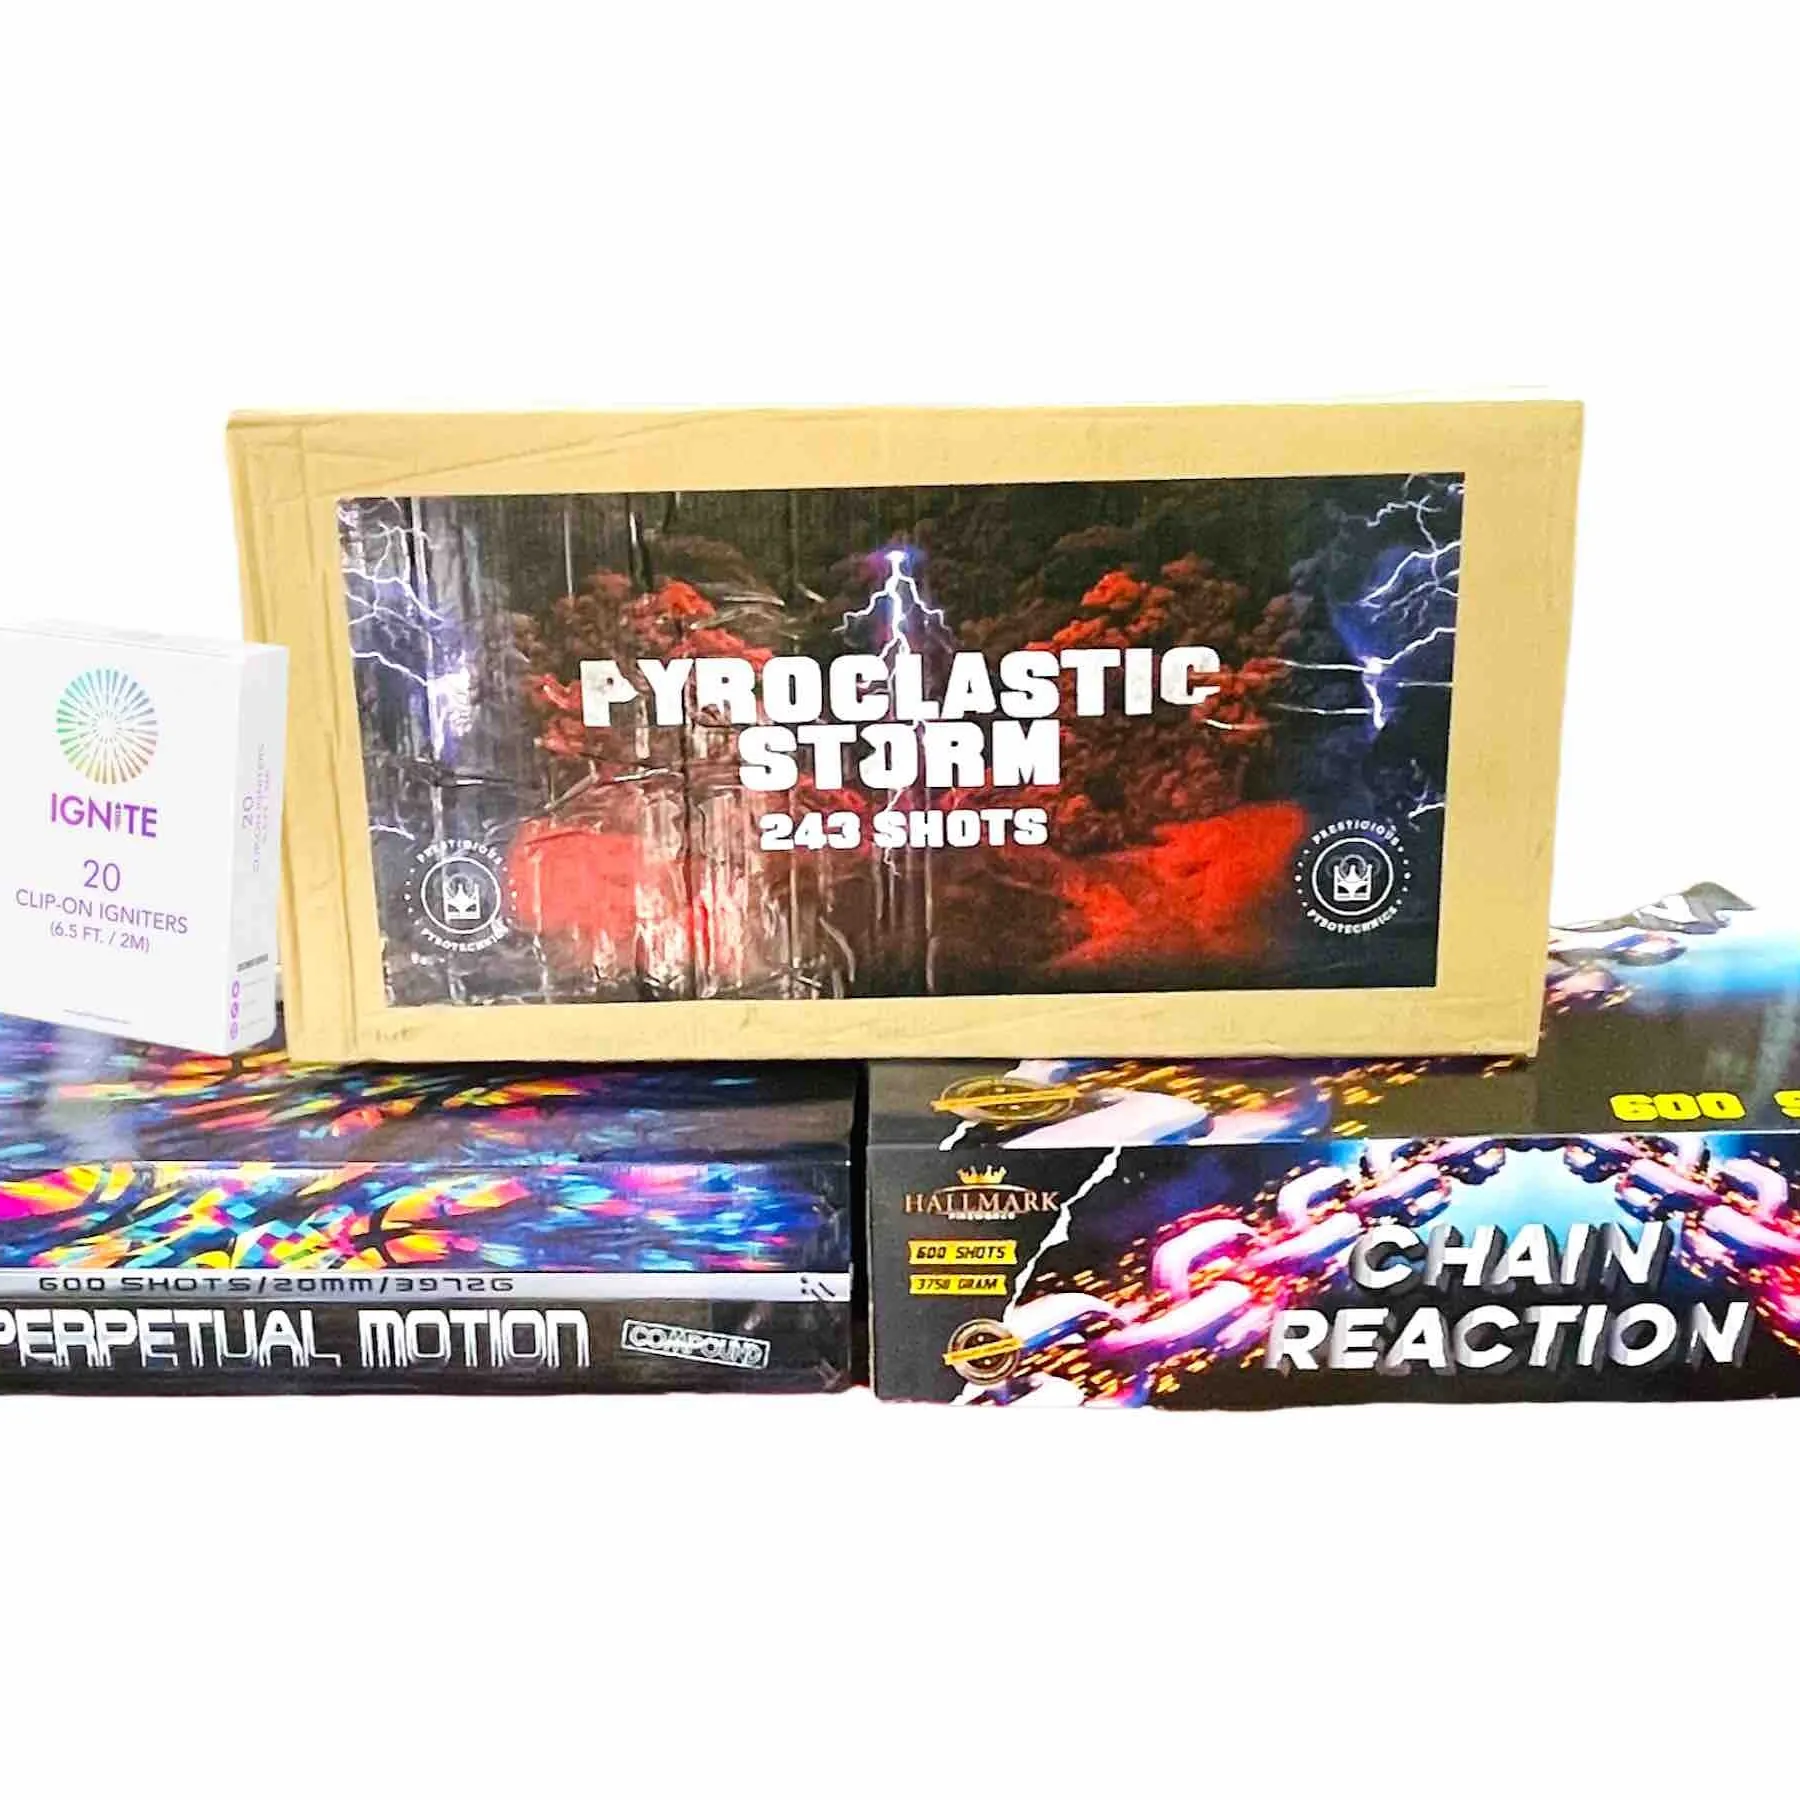 Pyroclastic Storm bundle and ignite